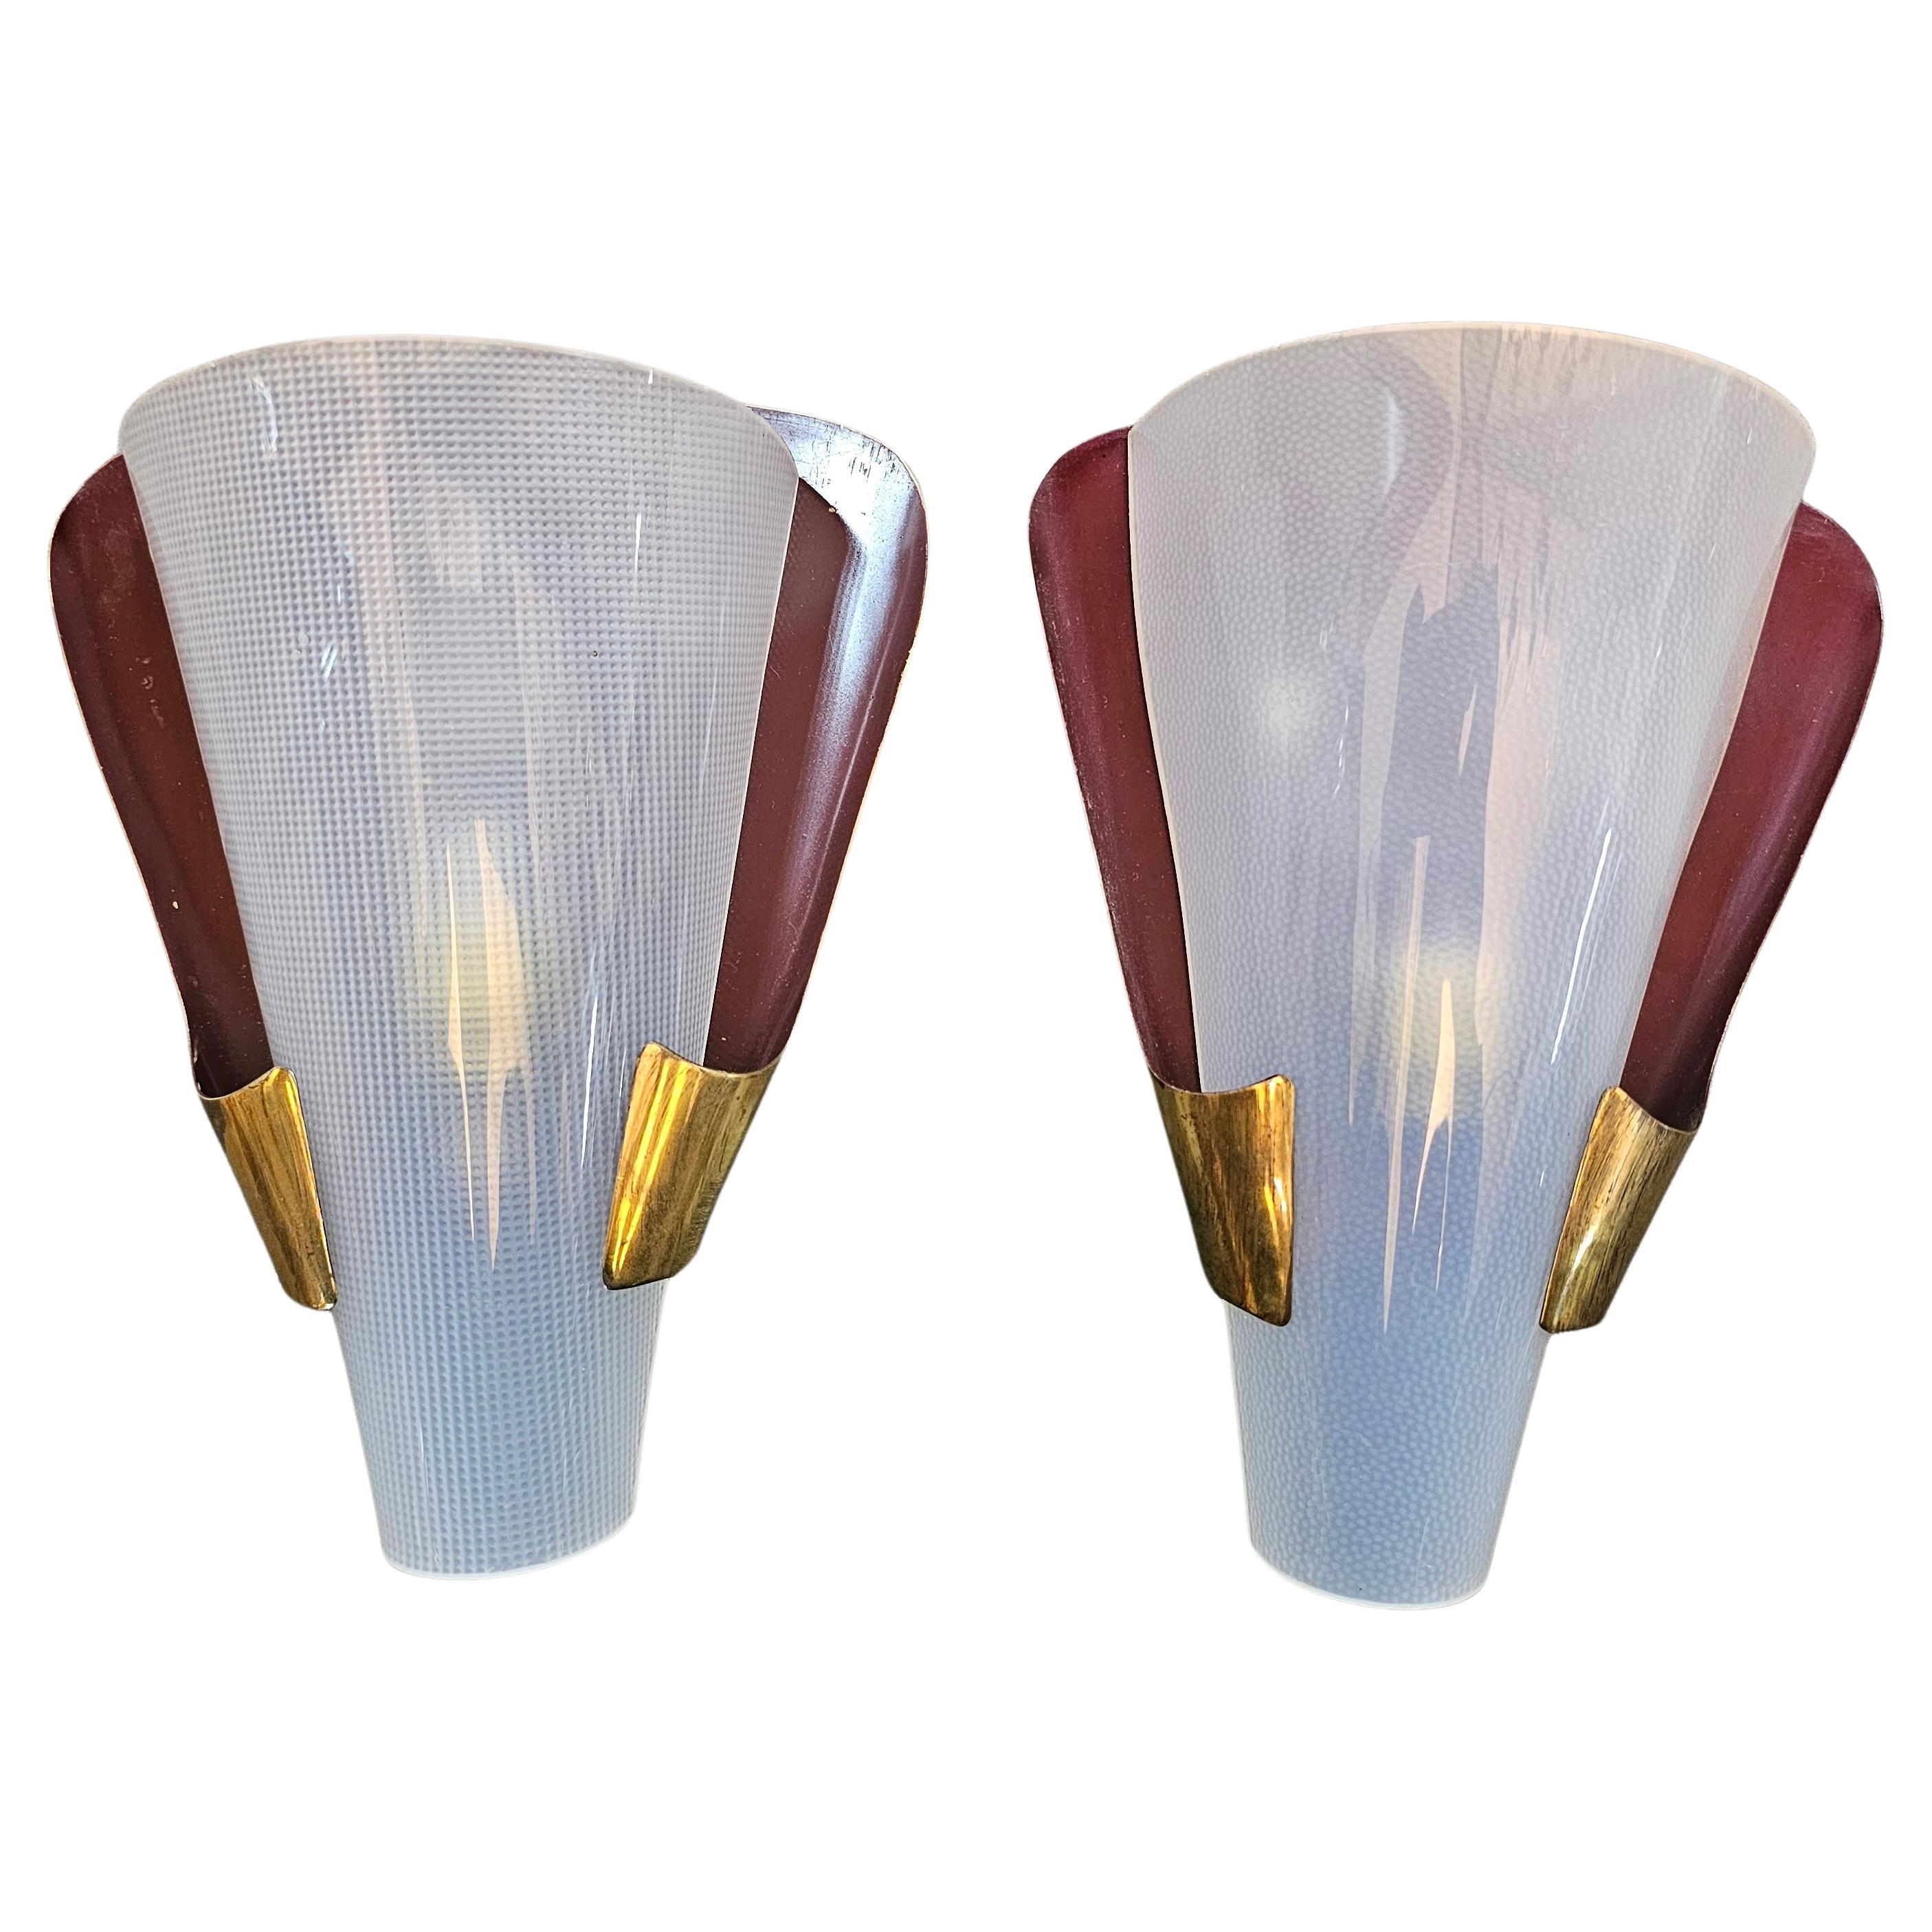 Pair of Mid Cnetury Modern Brass Sconces attr. to Stilnovo, Italy 1950s For Sale